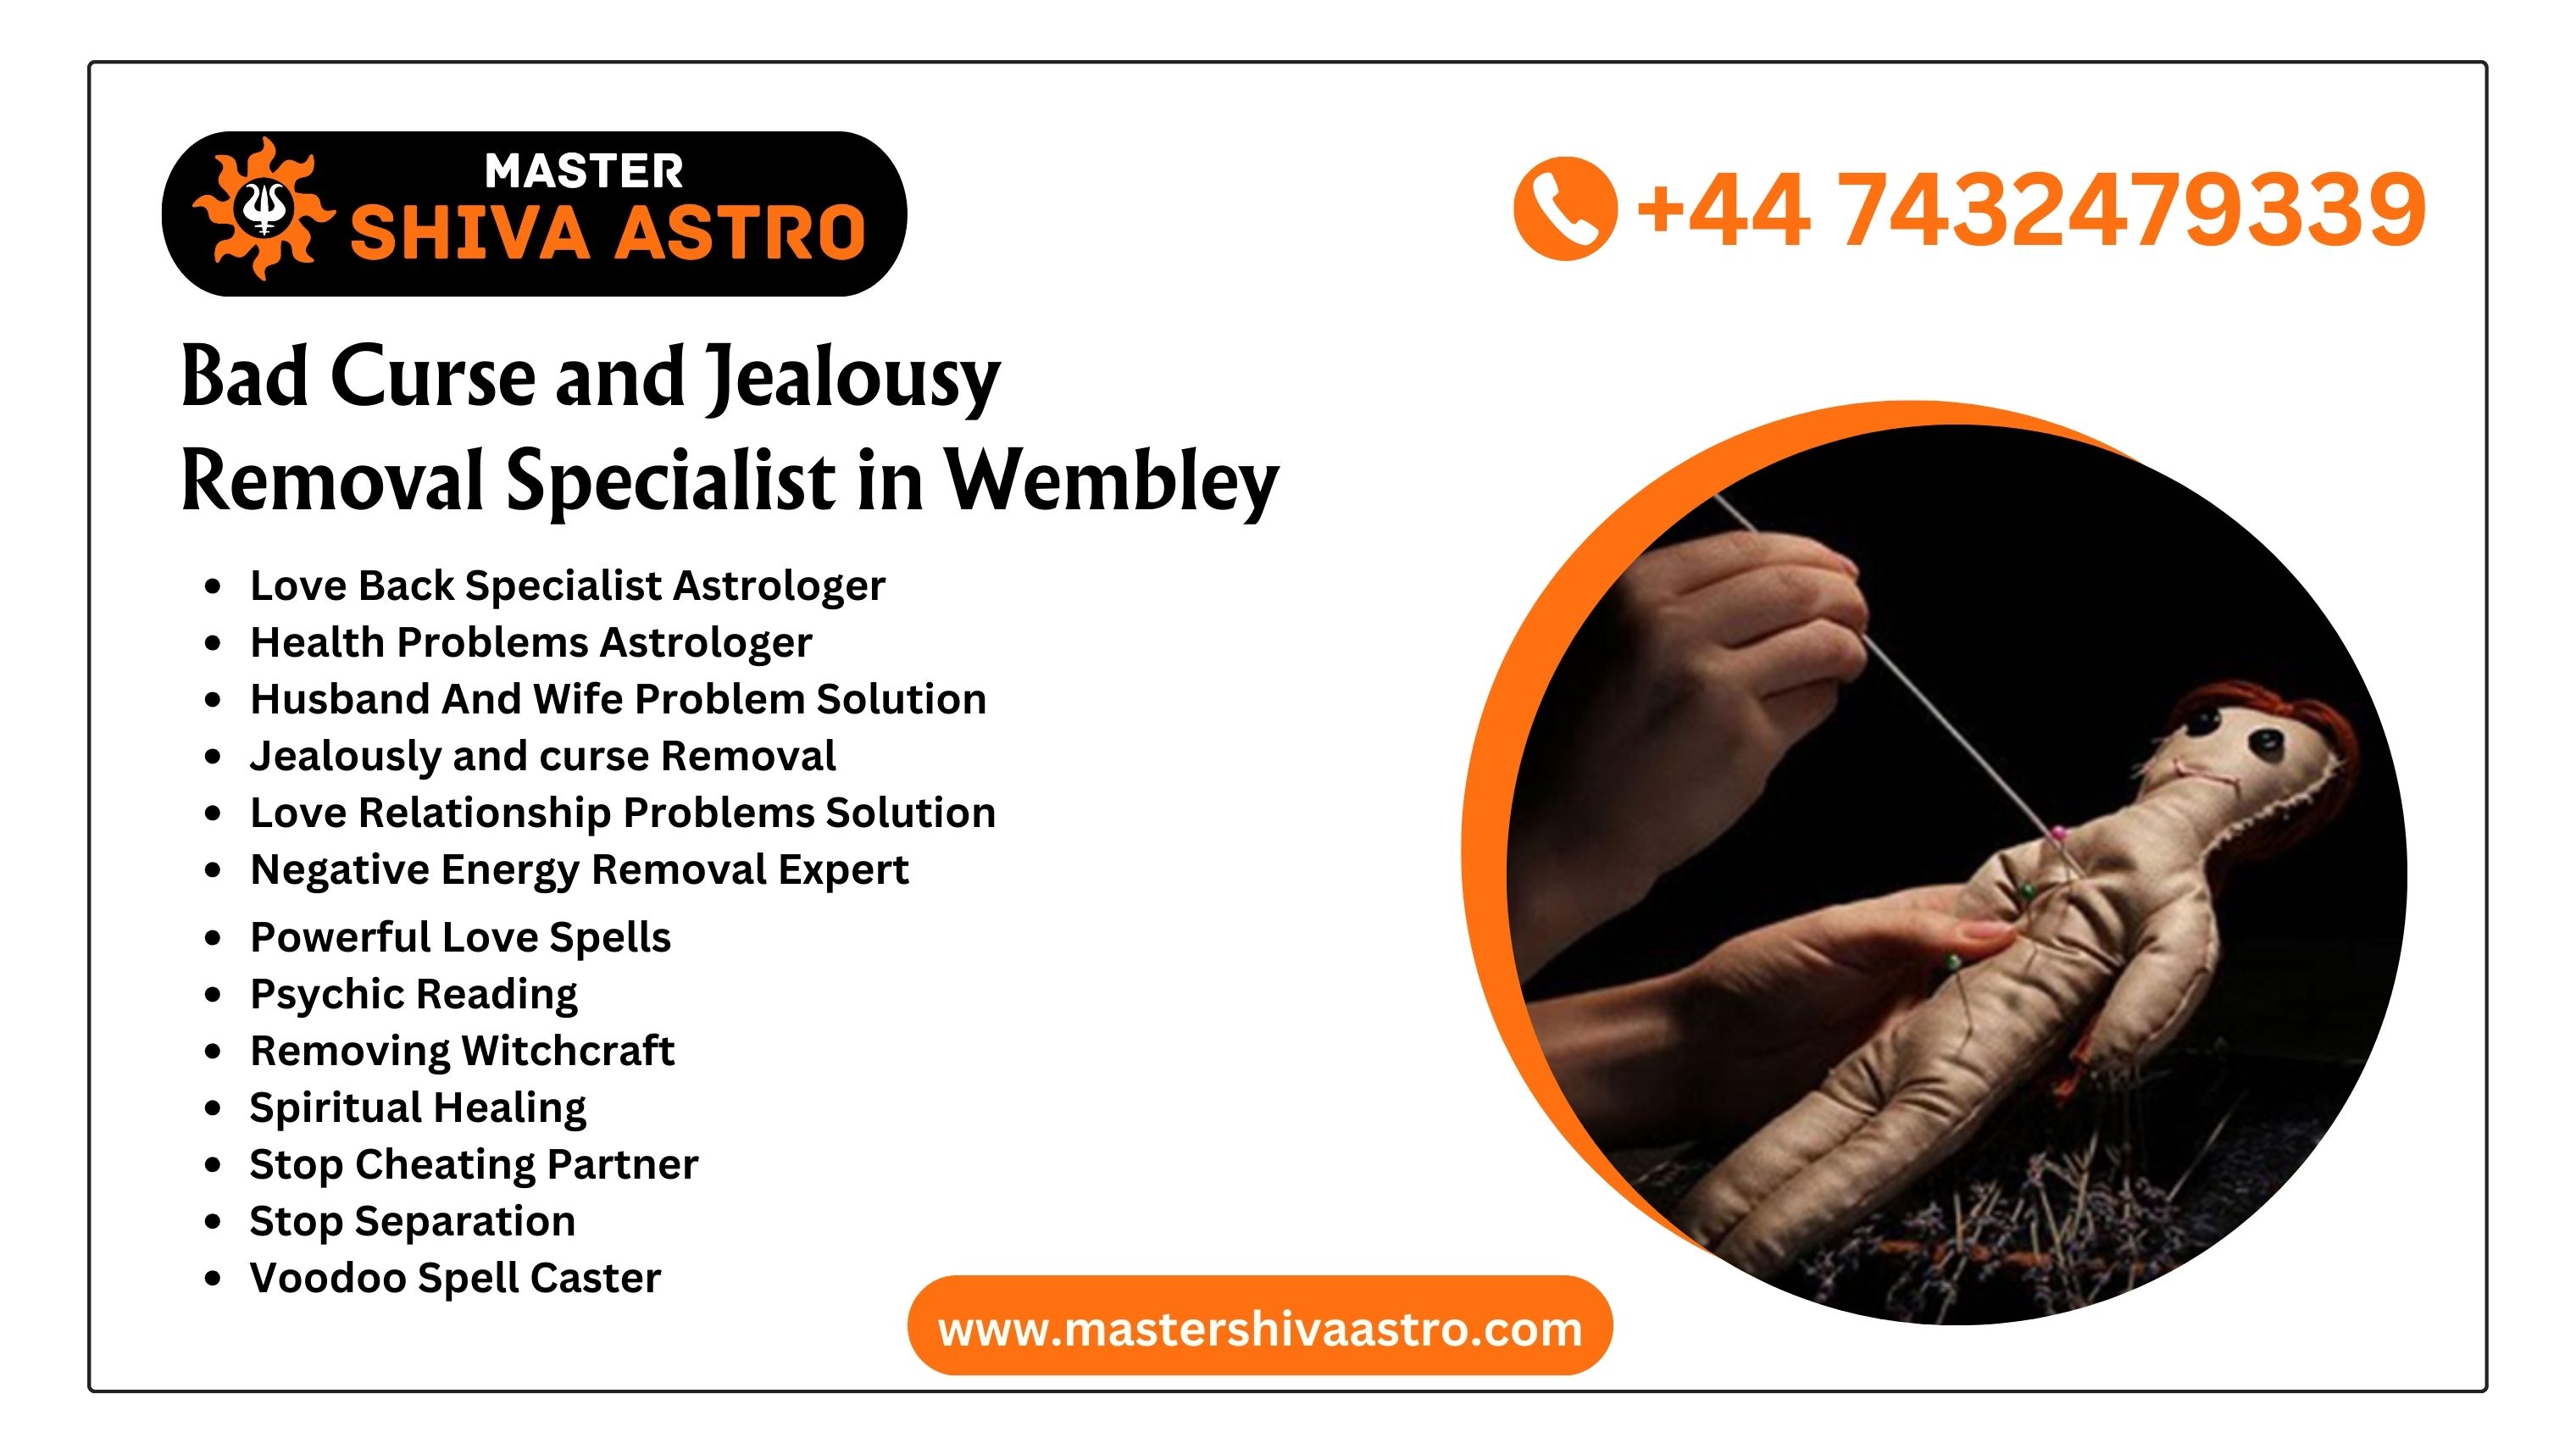 Bad Curse and Jealousy Removal Specialist in Wembley - Master Shiva